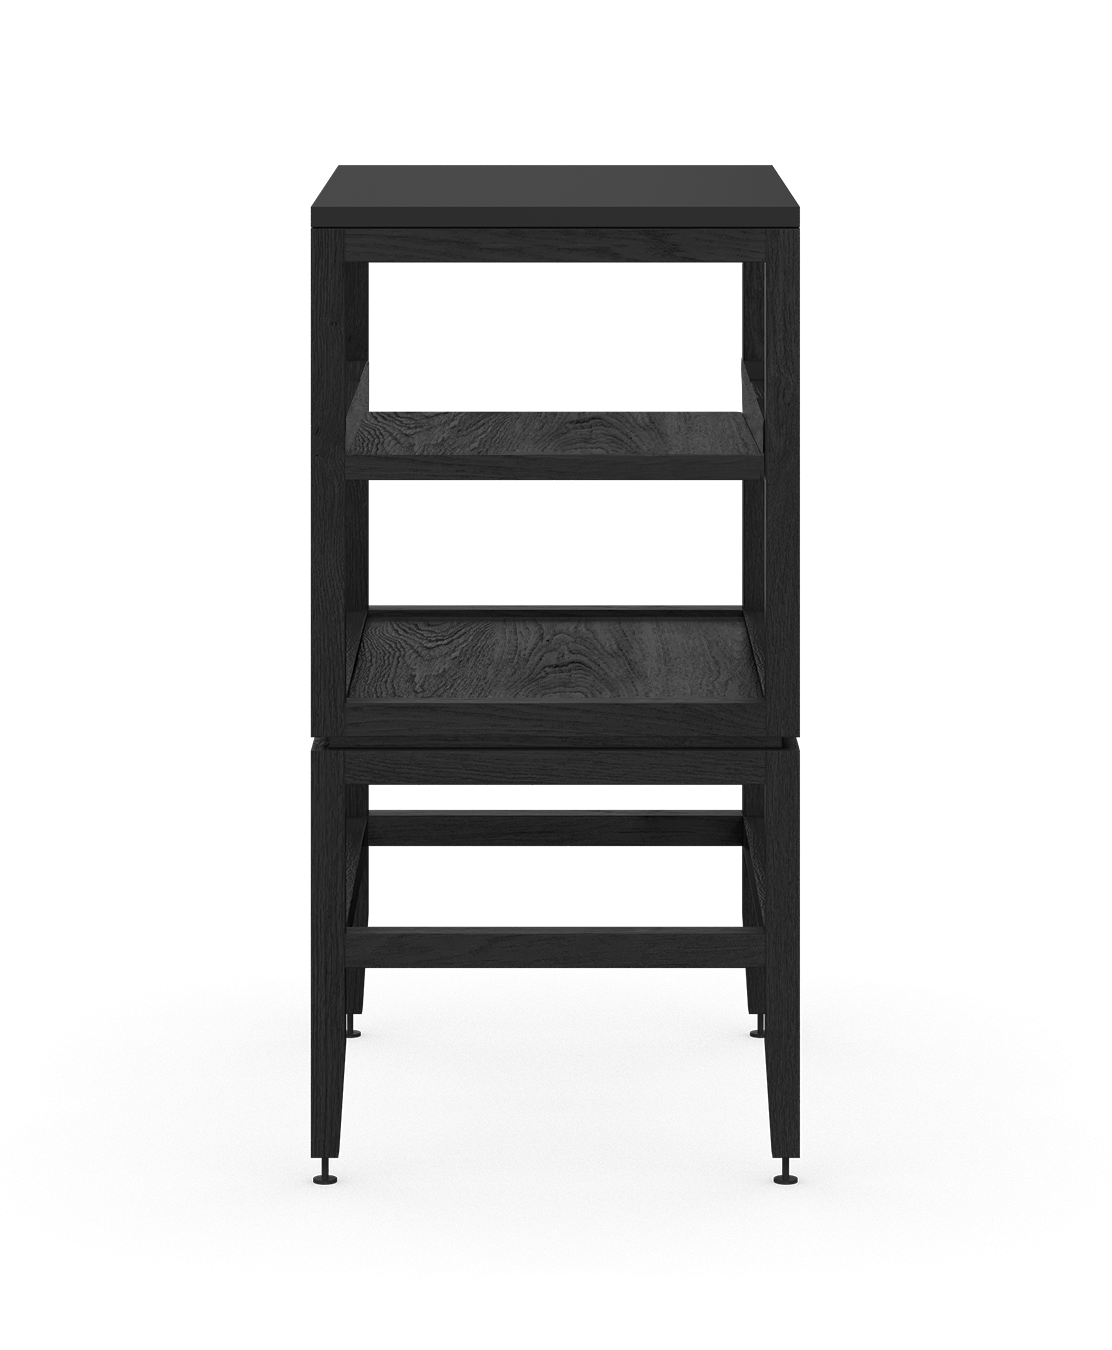 Coquo modular open kitchen cabinet with shelves in black stained oak. 